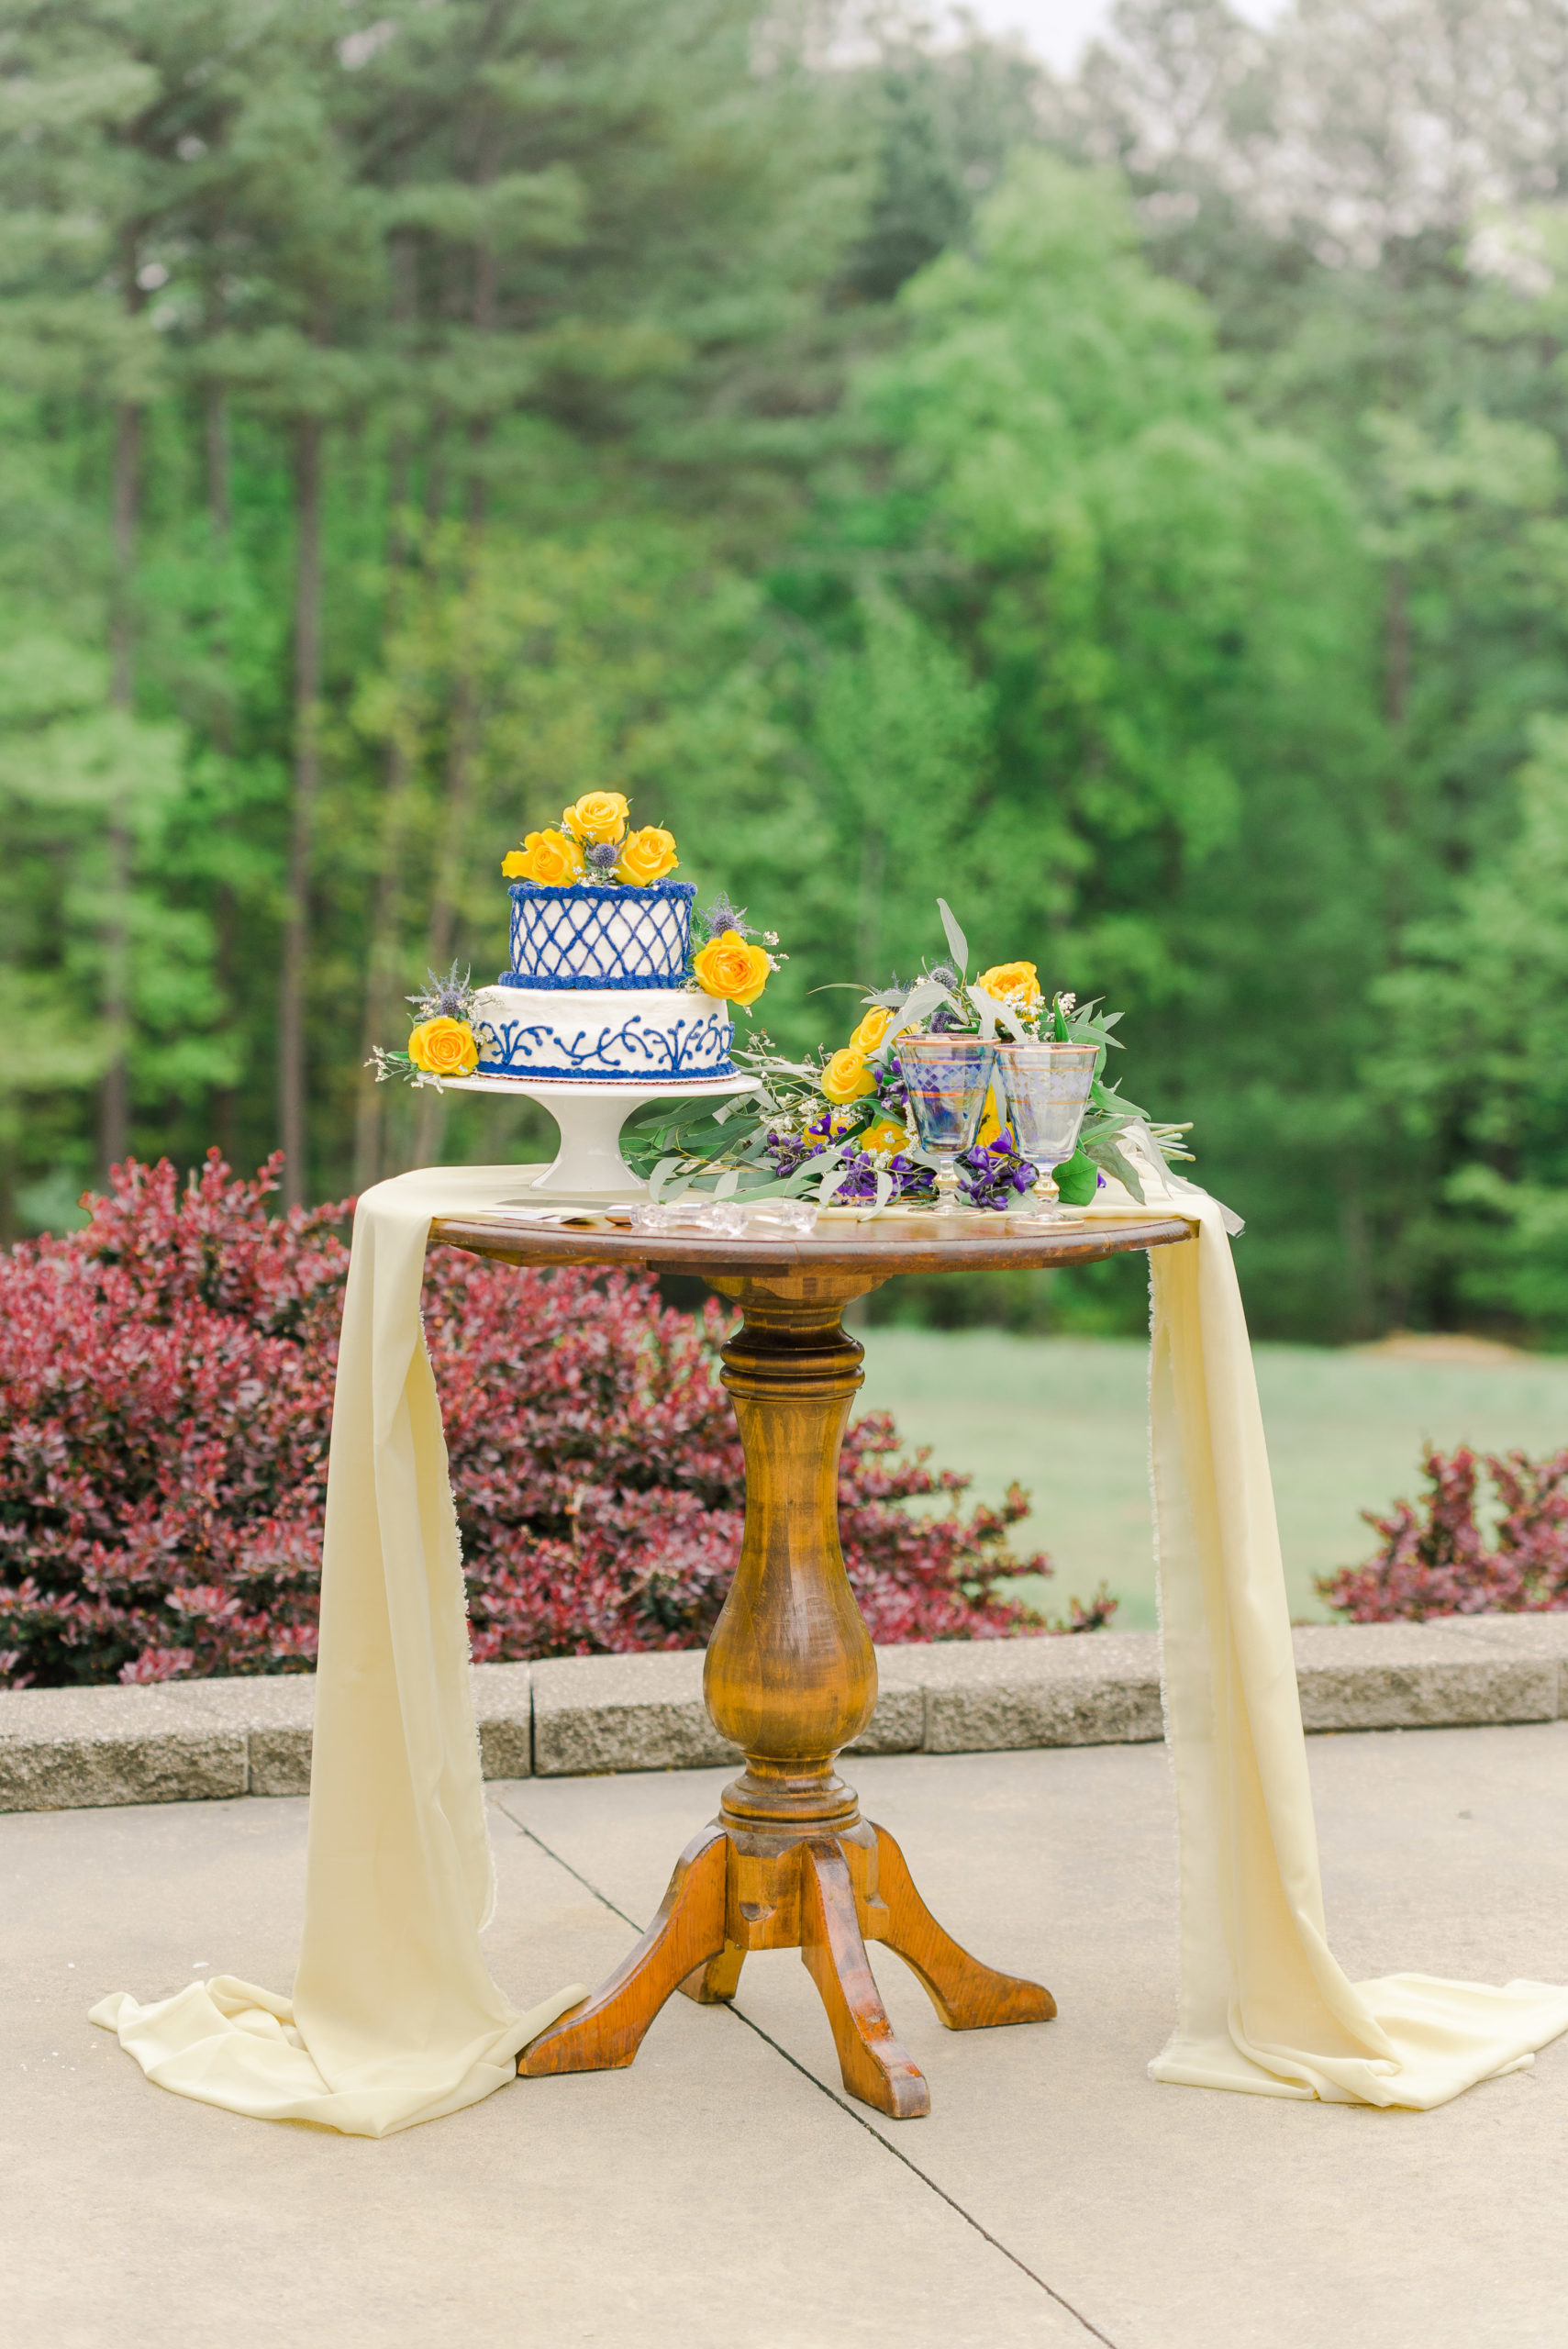 wedding cake tablescape for styled shoot outdoors